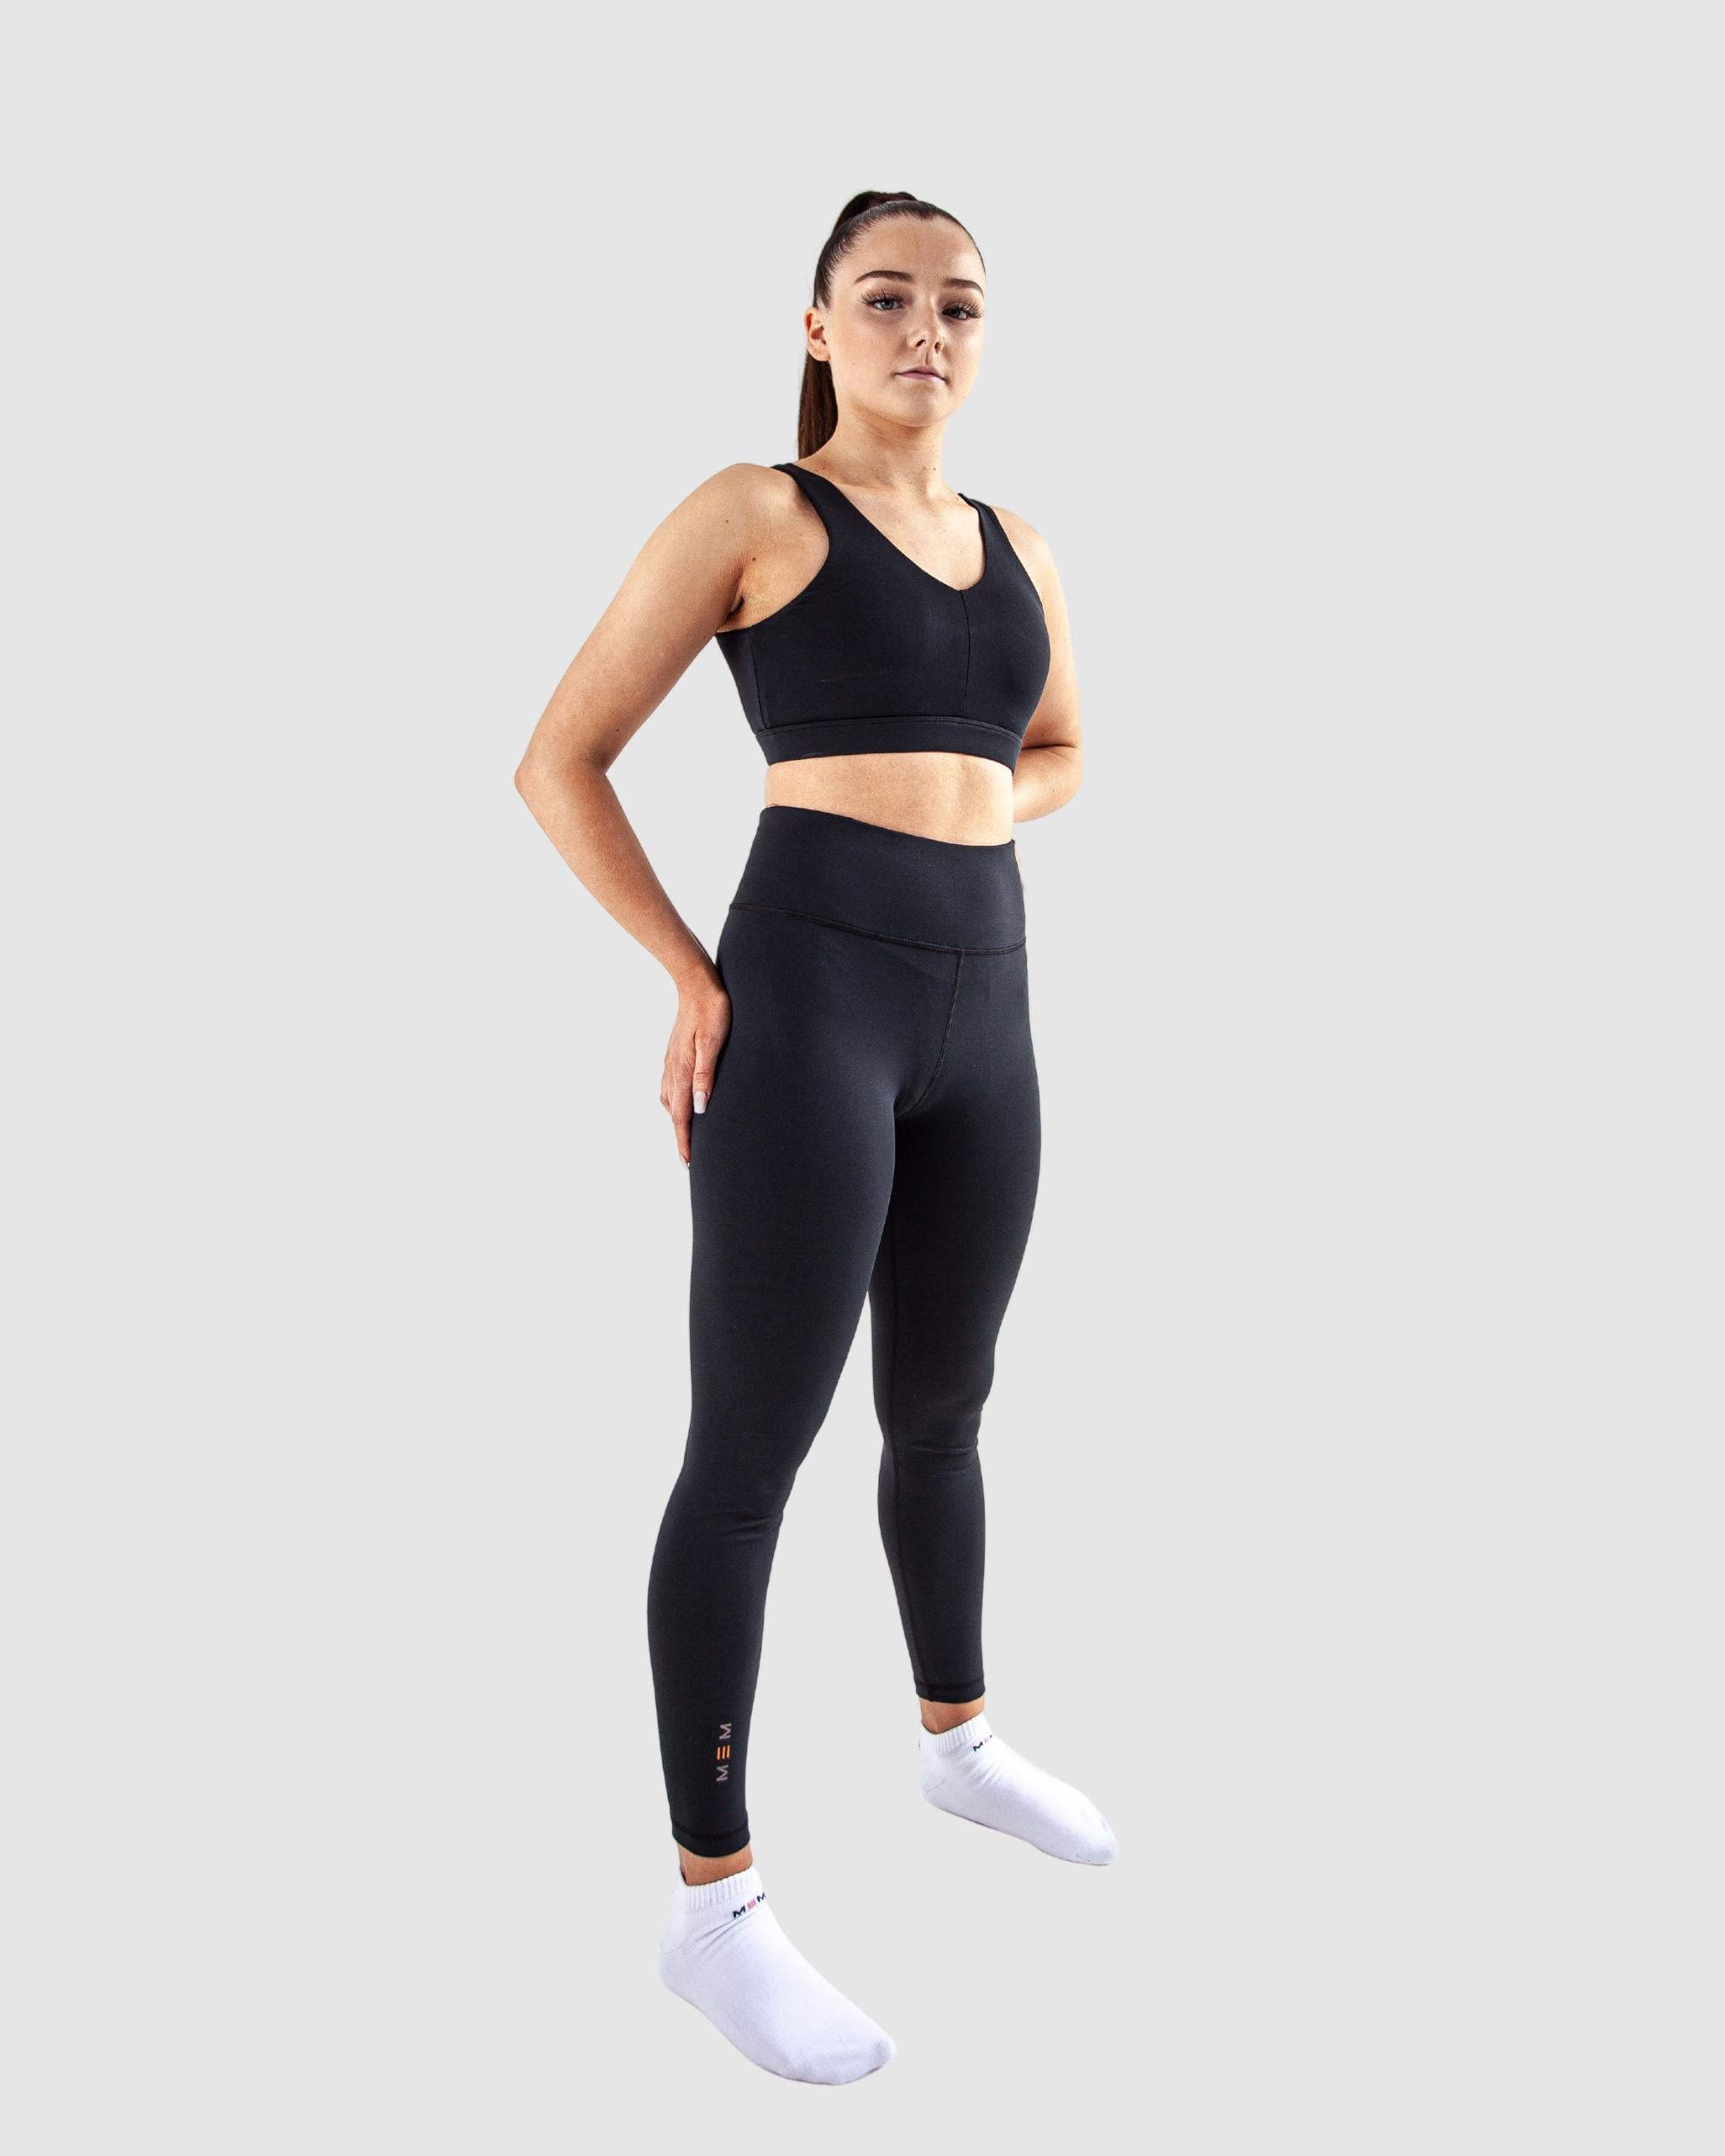 Solid White Non See Through Leggings Plain Simple High Waist Gym Yoga Pants  Booty Shaping Activewear Women Workout Clothing Fitness -  Denmark